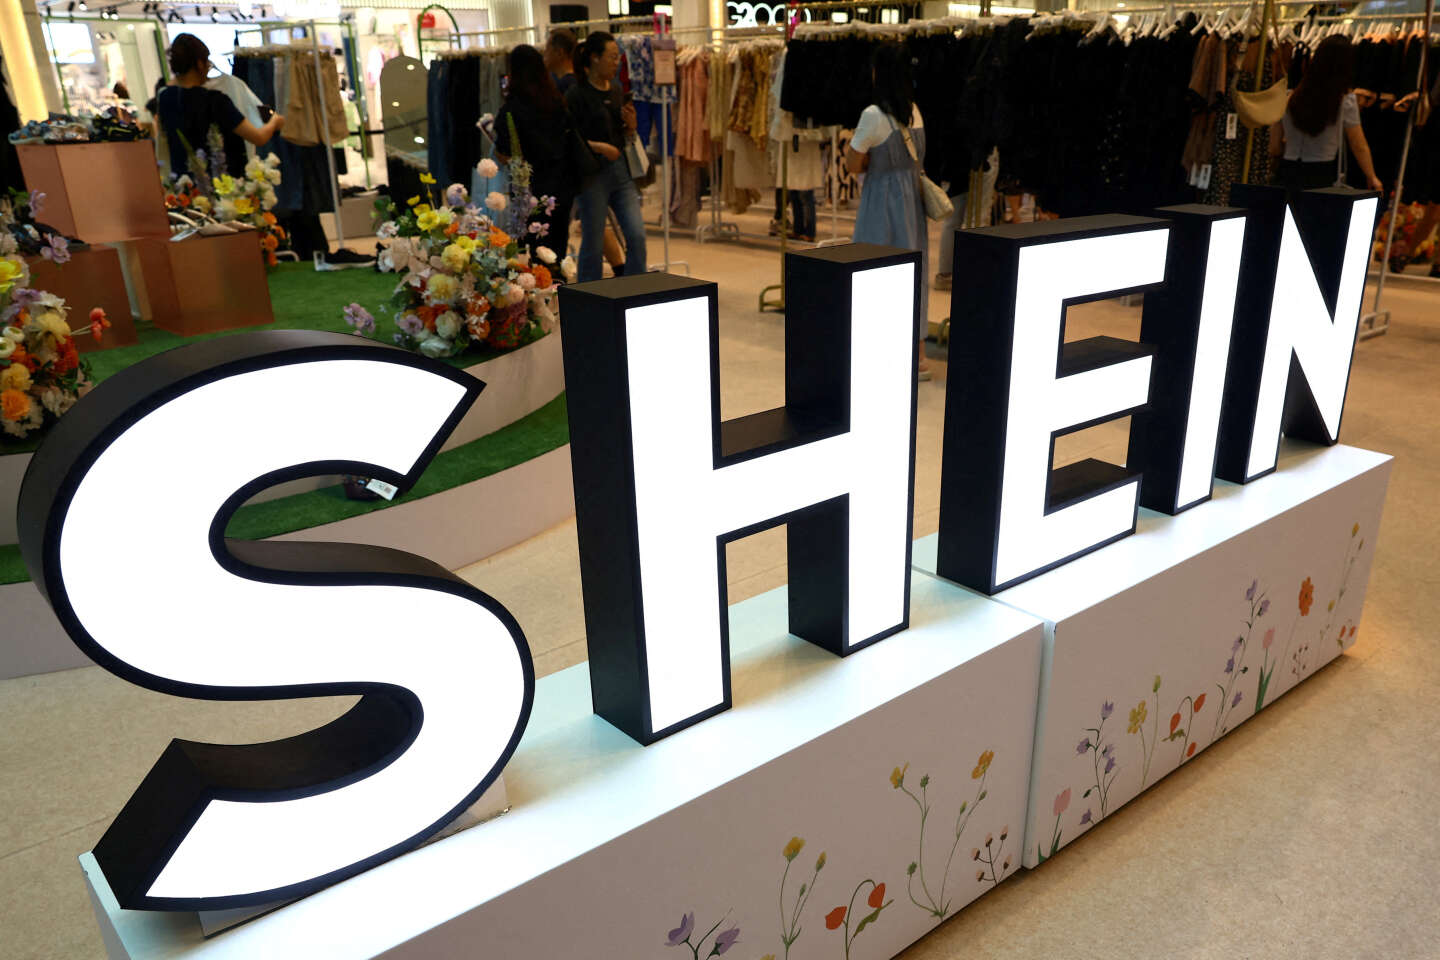 Seoul authorities find Shein products contain high levels of toxic chemicals